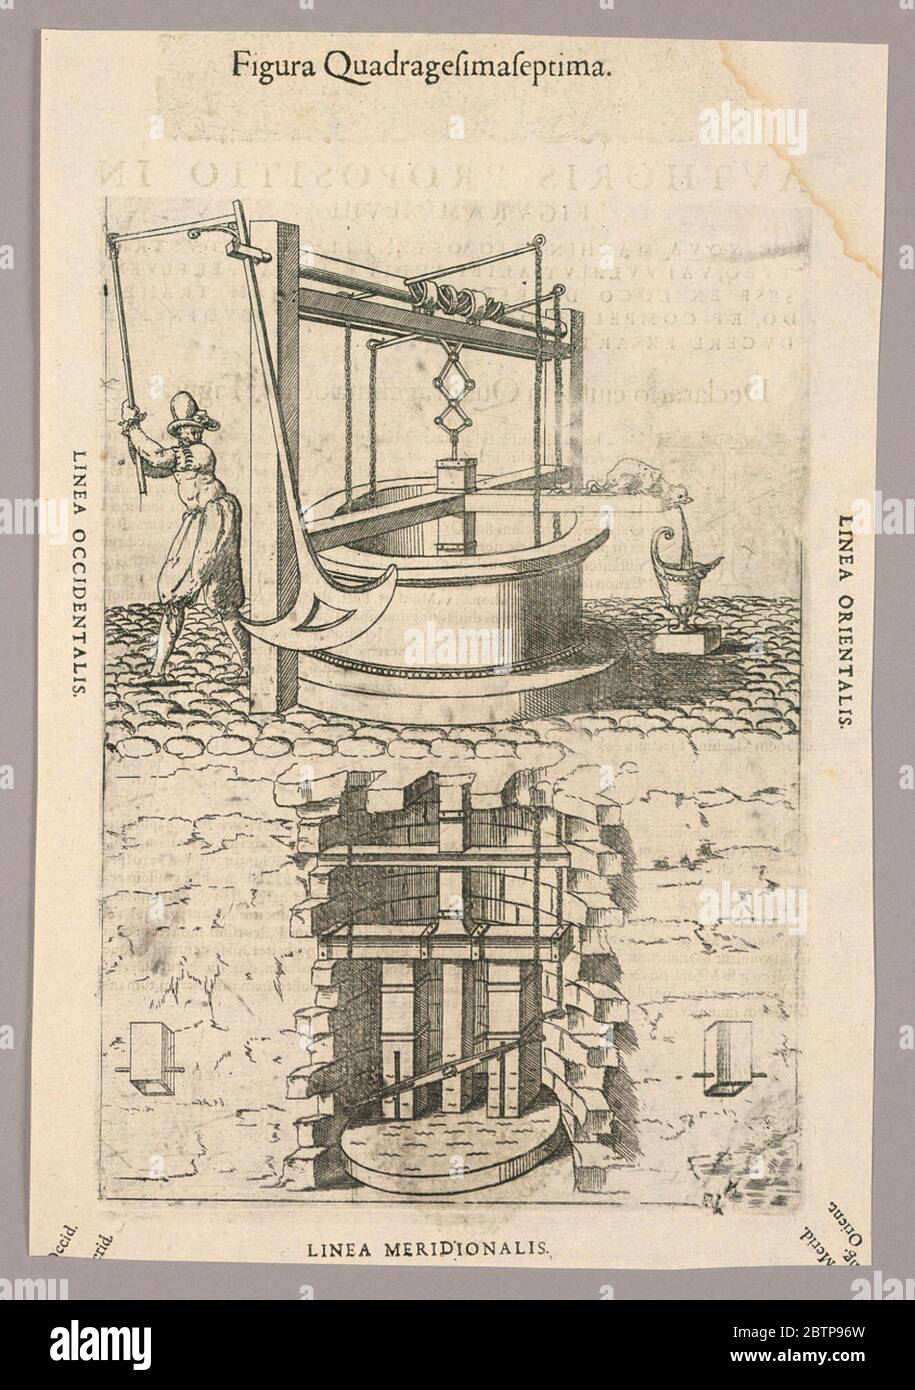 Plate XLVII from Theatrum instrumentorum et machinarum. Research in ProgressMachine pumping water out of a well, through a spout, left. Bottom of well interior shown below; man runs it with a lever and pendulum, left. Description in Latin on verso of 1949-152-244. Stock Photo